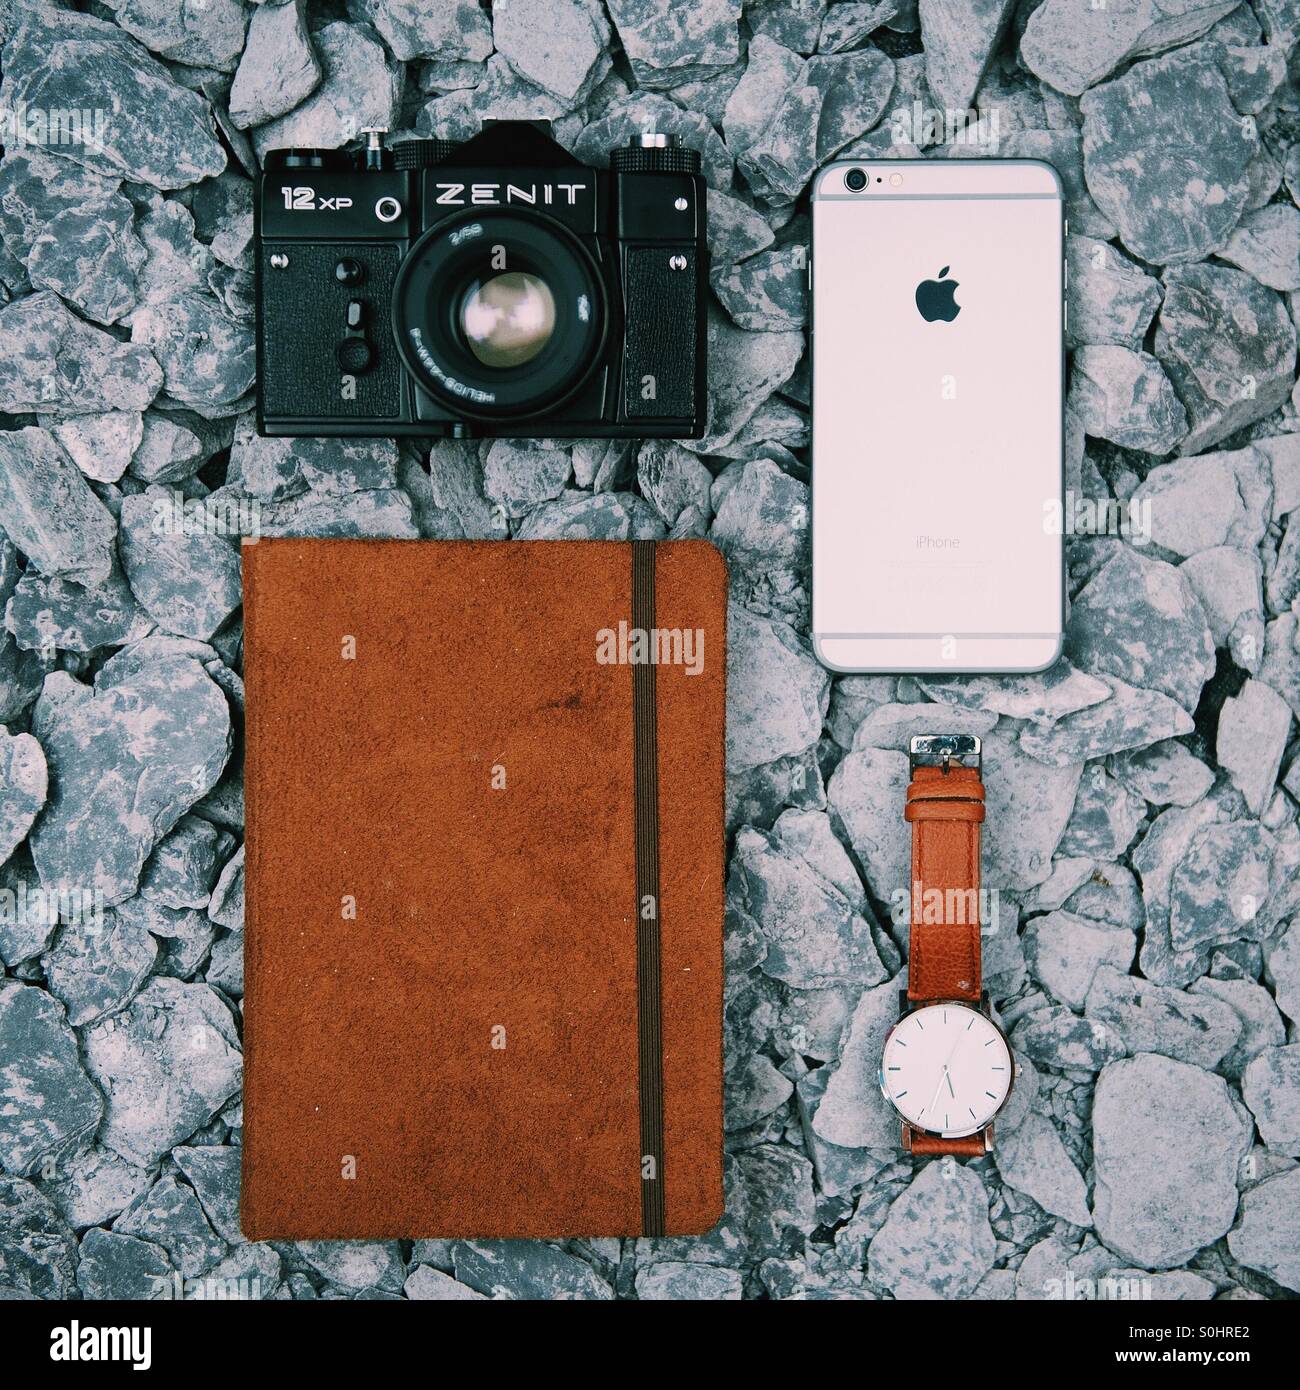 A Zenit 12xp Film Camera along side a brown leather watch, brown notebook and iPhone 6 plus with slate as the background Stock Photo